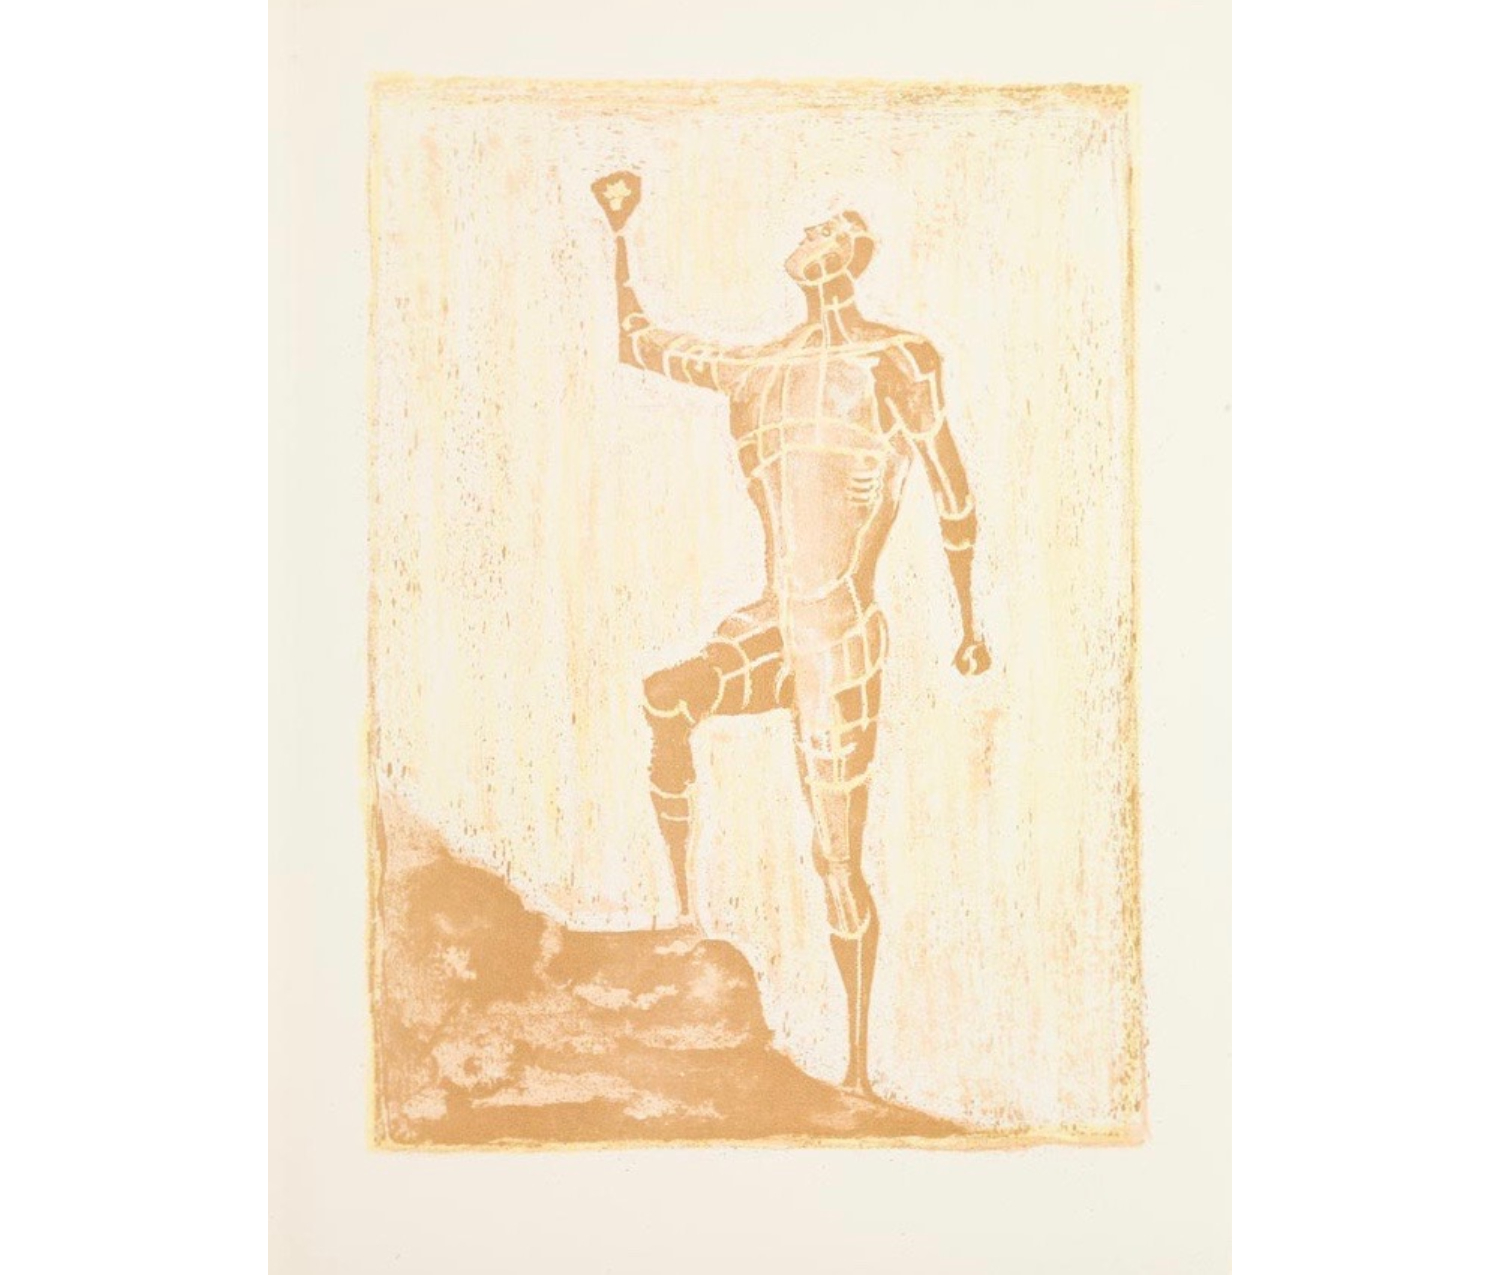 Prometheus stands with his hand to the sky, his foot on a boulder, looking upward. He stands on sloped ground and is rendered in yellow and gold.